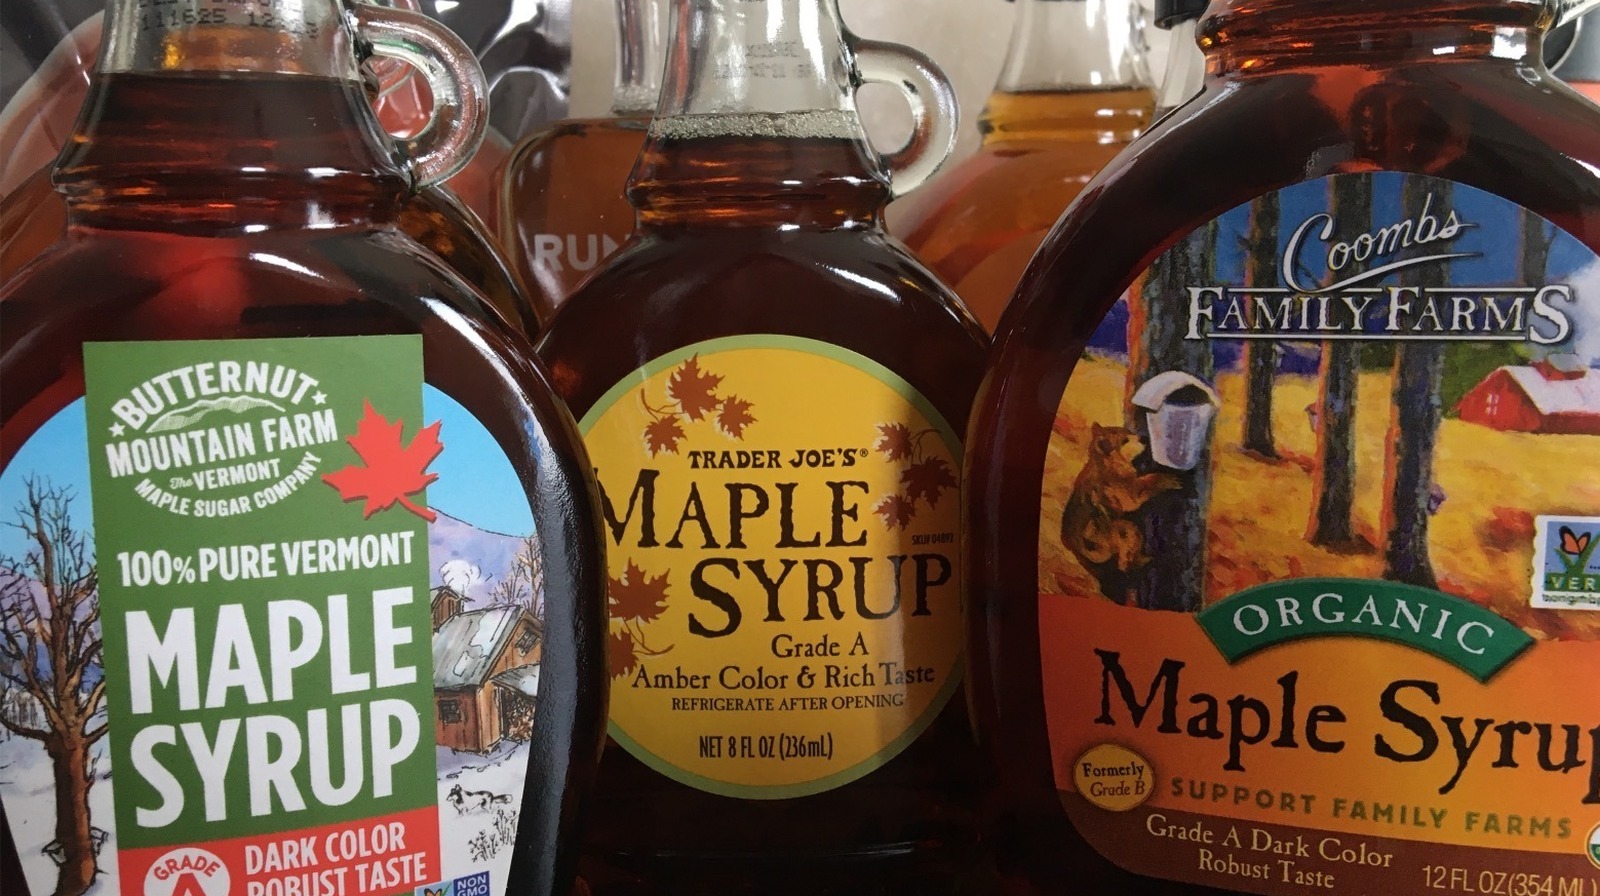 Coombs Family Farms Maple Syrup, Organic Grade A, Dark Color, Robust Taste,  8 Fl Oz